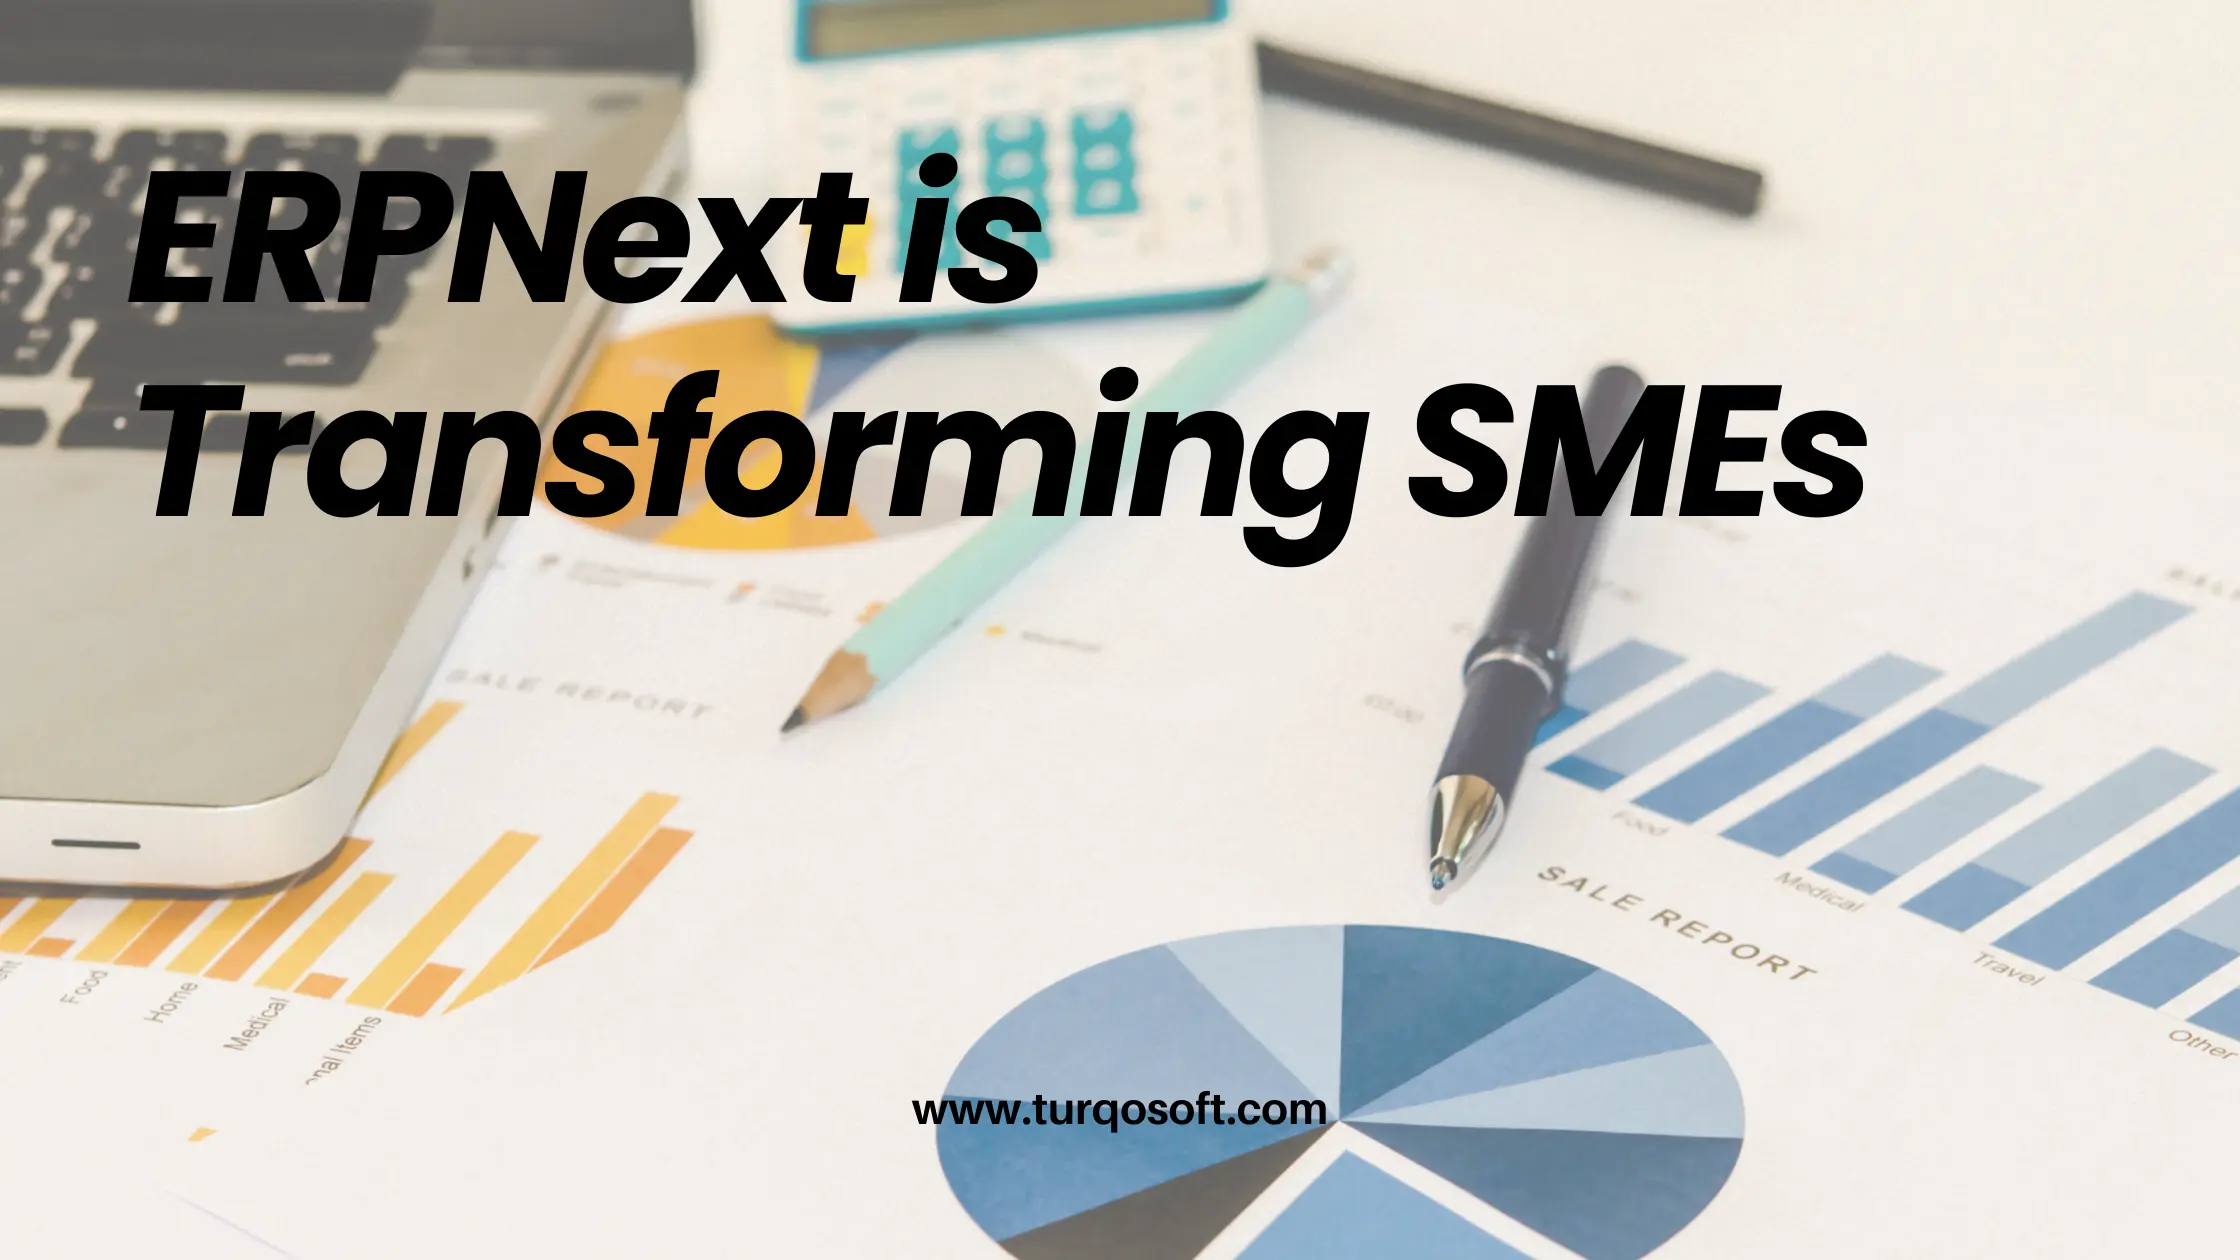 How ERPNext is Transforming SMEs